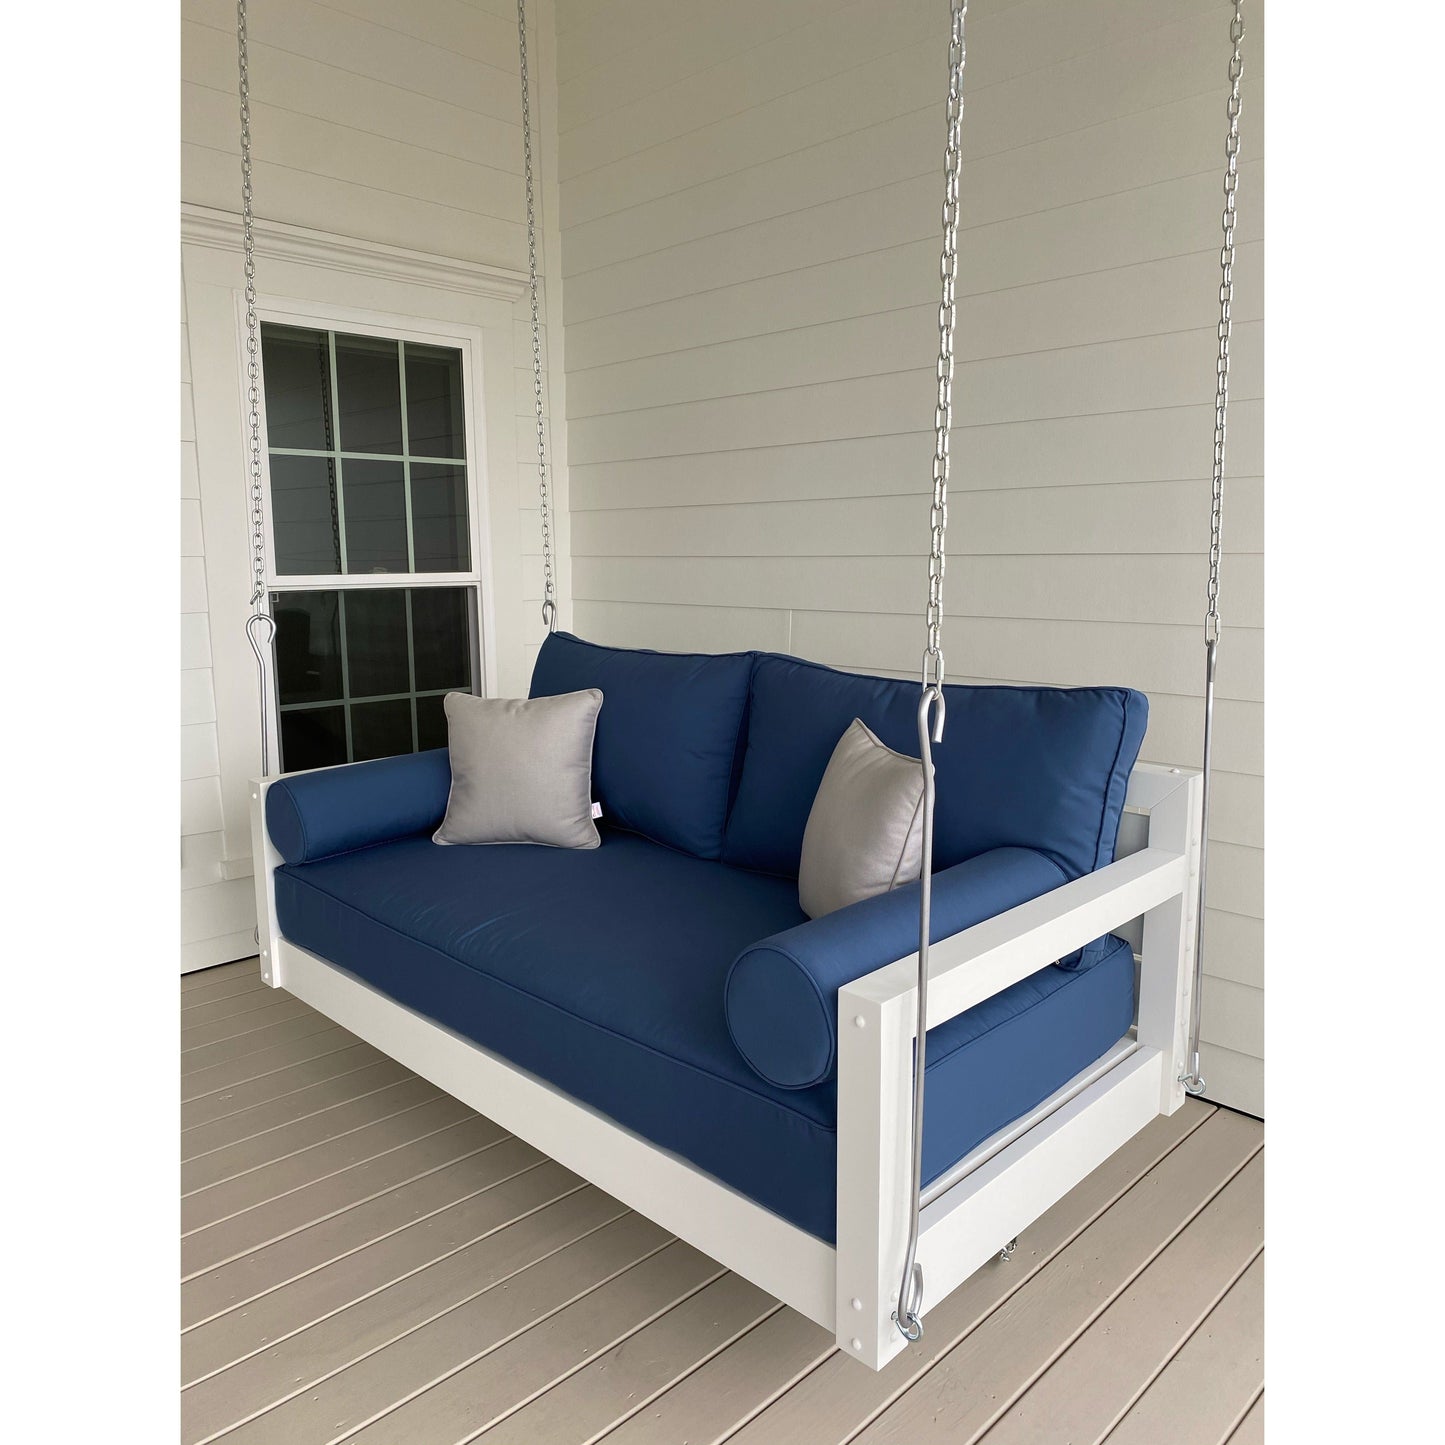 The Bedroom Emporium Lowcountry Swing Beds The Kiawah Swing Bed